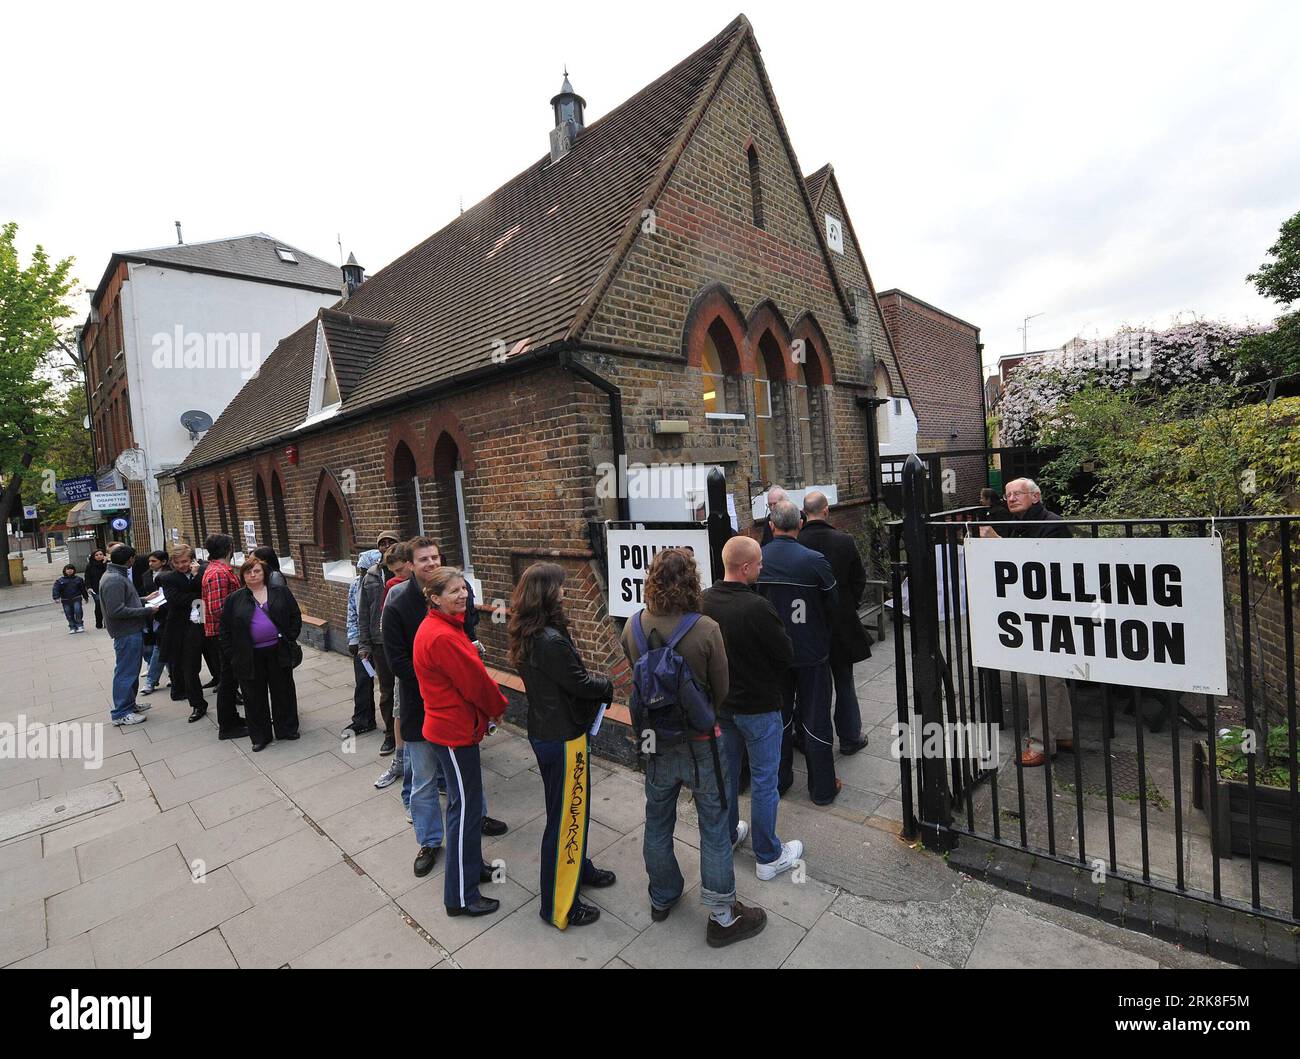 Bildnummer: 54030342  Datum: 06.05.2010  Copyright: imago/Xinhua (100506) -- LONDON, May 6, 2010 (Xinhua) -- Voters wait to cast their ballots at a polling station in London, Britain, May 6, 2010. The turnout for the most eagerly anticipated general election for nearly 40 years in Britain was expected to be up on the last general election s figure of 61 percent, and some commentators believe it could be as high as 70 percent, (Xinhua/Wu Wei) (zw) (1)BRITAIN-LONDON-GENERAL ELECTION-TURNOUT PUBLICATIONxNOTxINxCHN Gesellschaft Politik Wahl Wahlen England Wahllokal kbdig xdp premiumd xint 2010 que Stock Photo